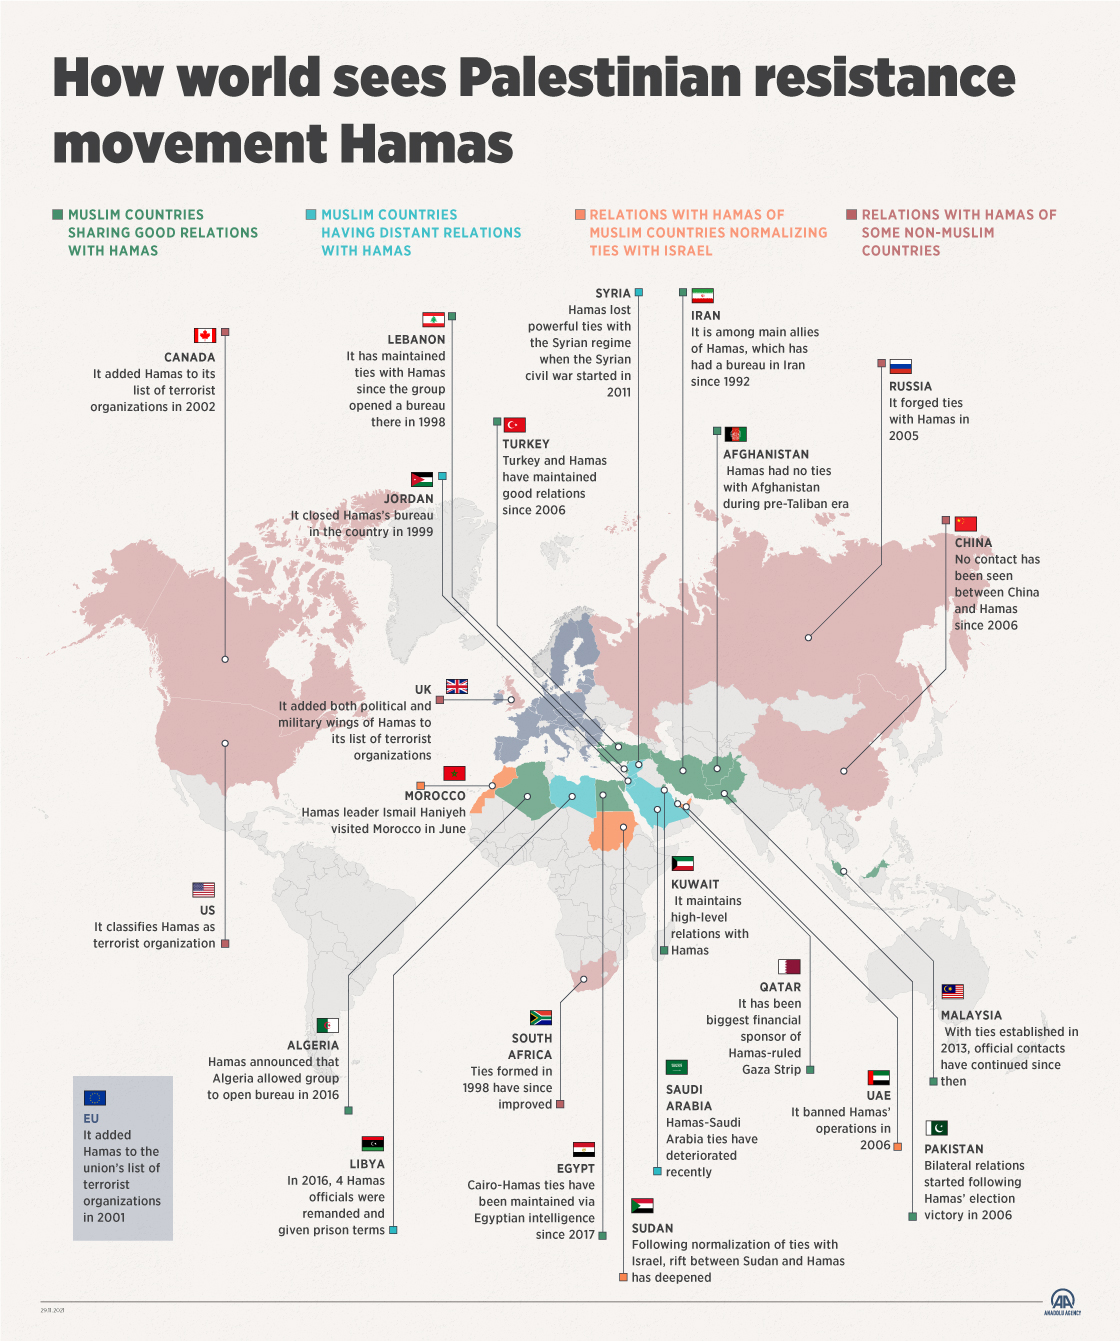 How world sees Palestinian resistance movement Hamas